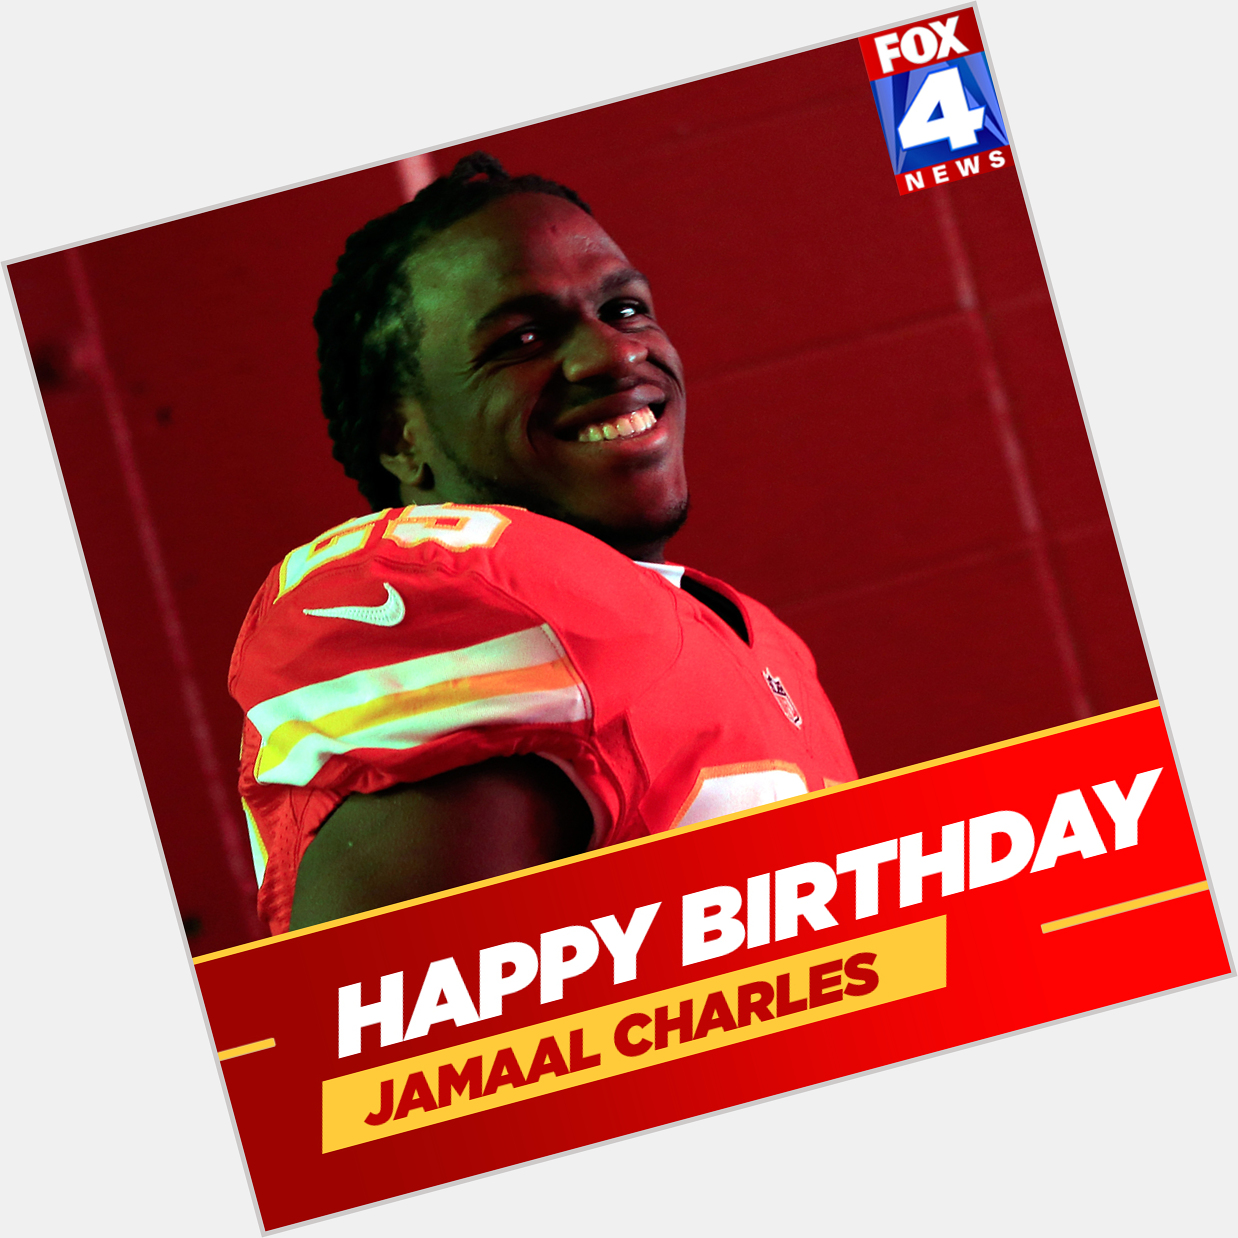 Happy birthday to former Chiefs running back Jamaal Charles! 